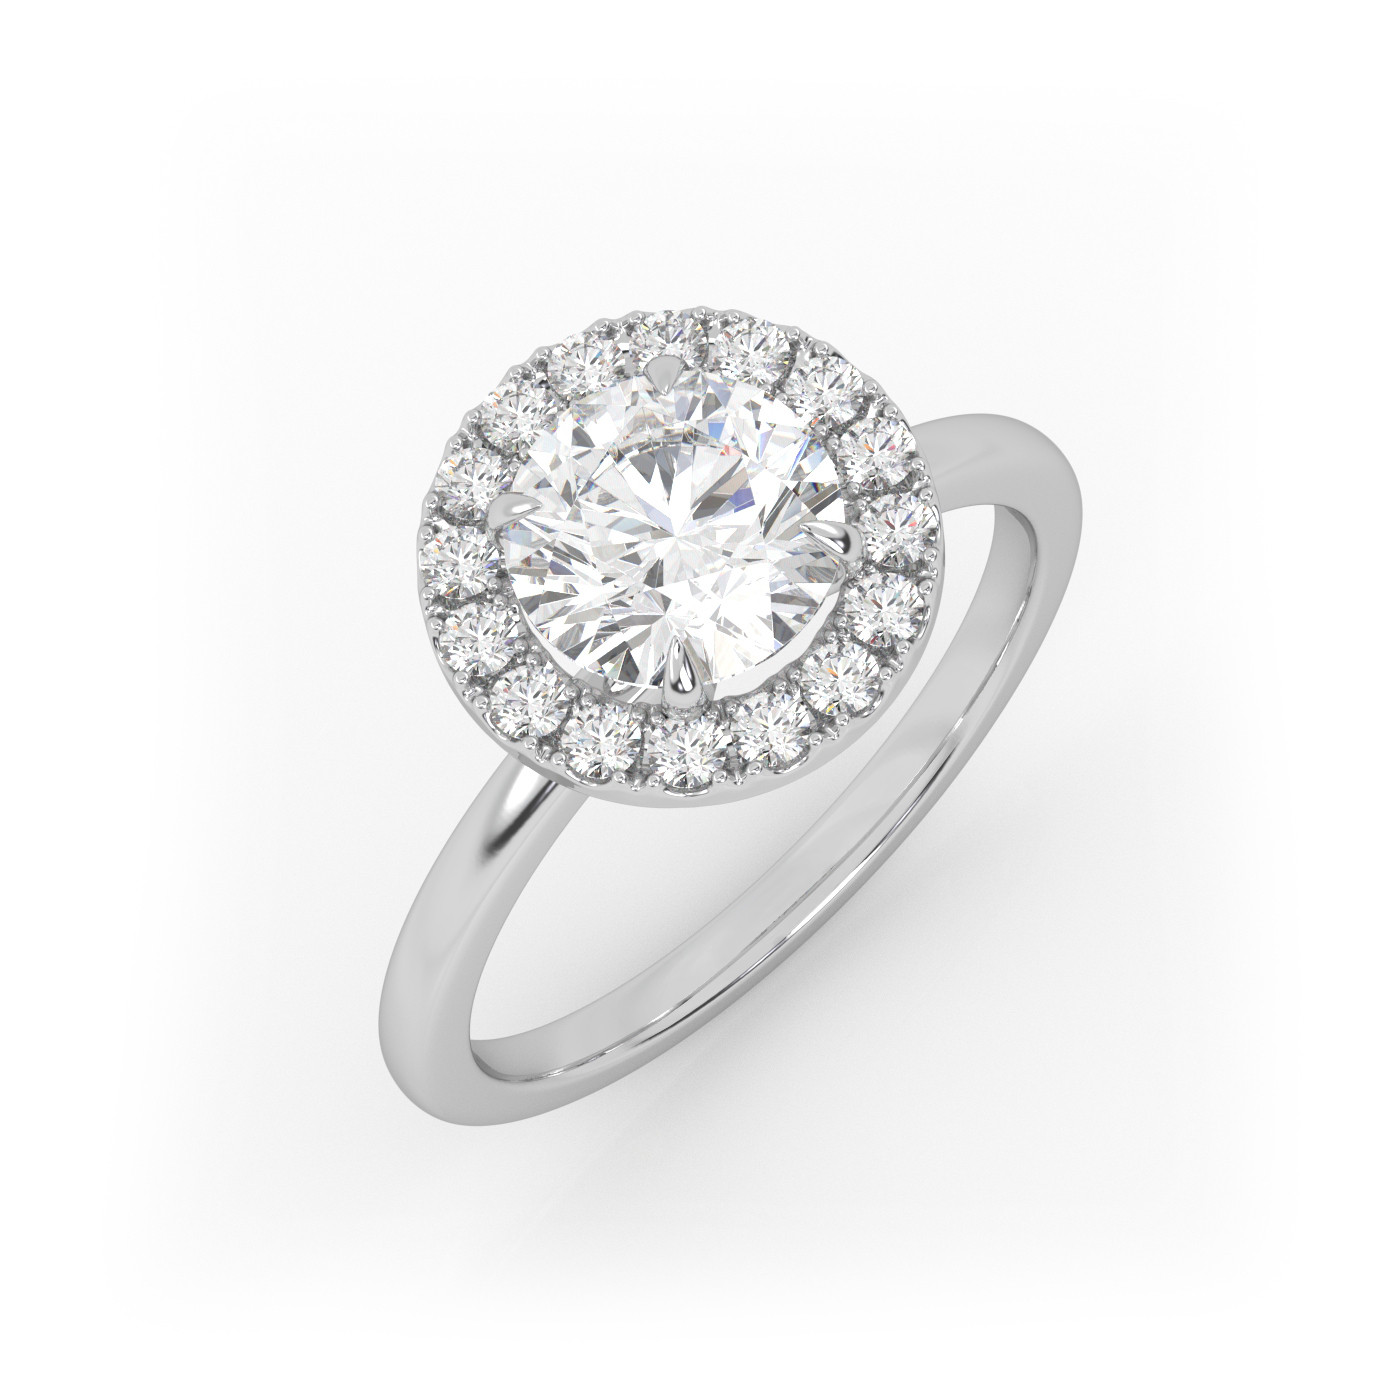 18K WHITE GOLD Round Diamond Cut Engagement Ring with Halo Style